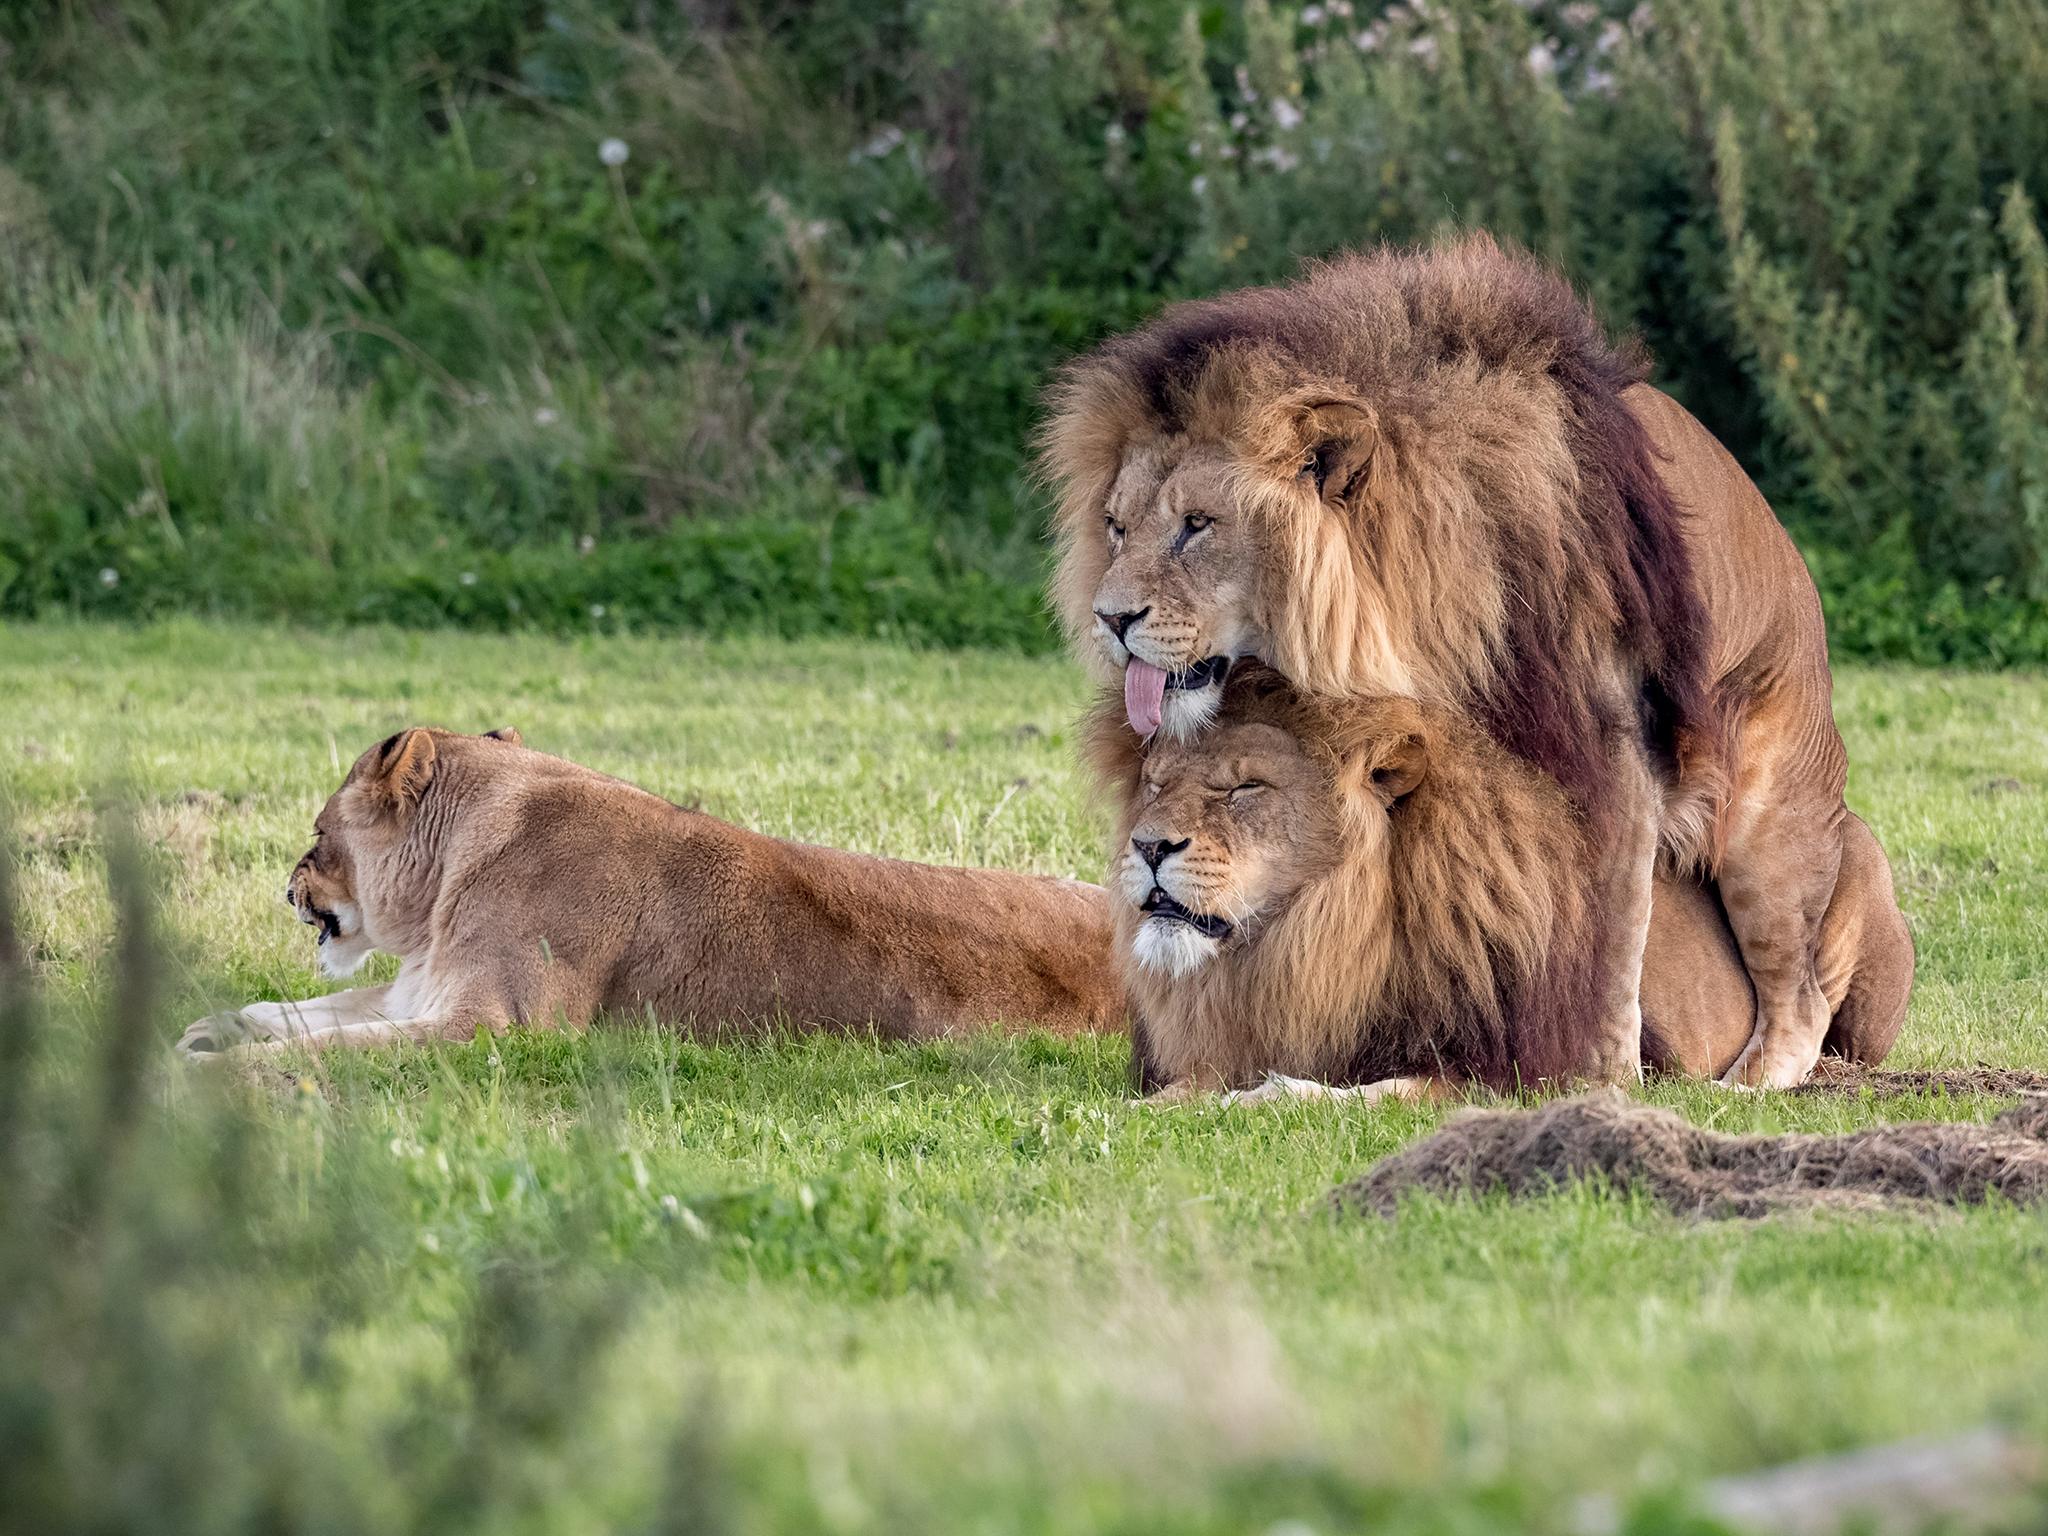 Gay pride: Two male lions seen 'mating' at wildlife park | The ...